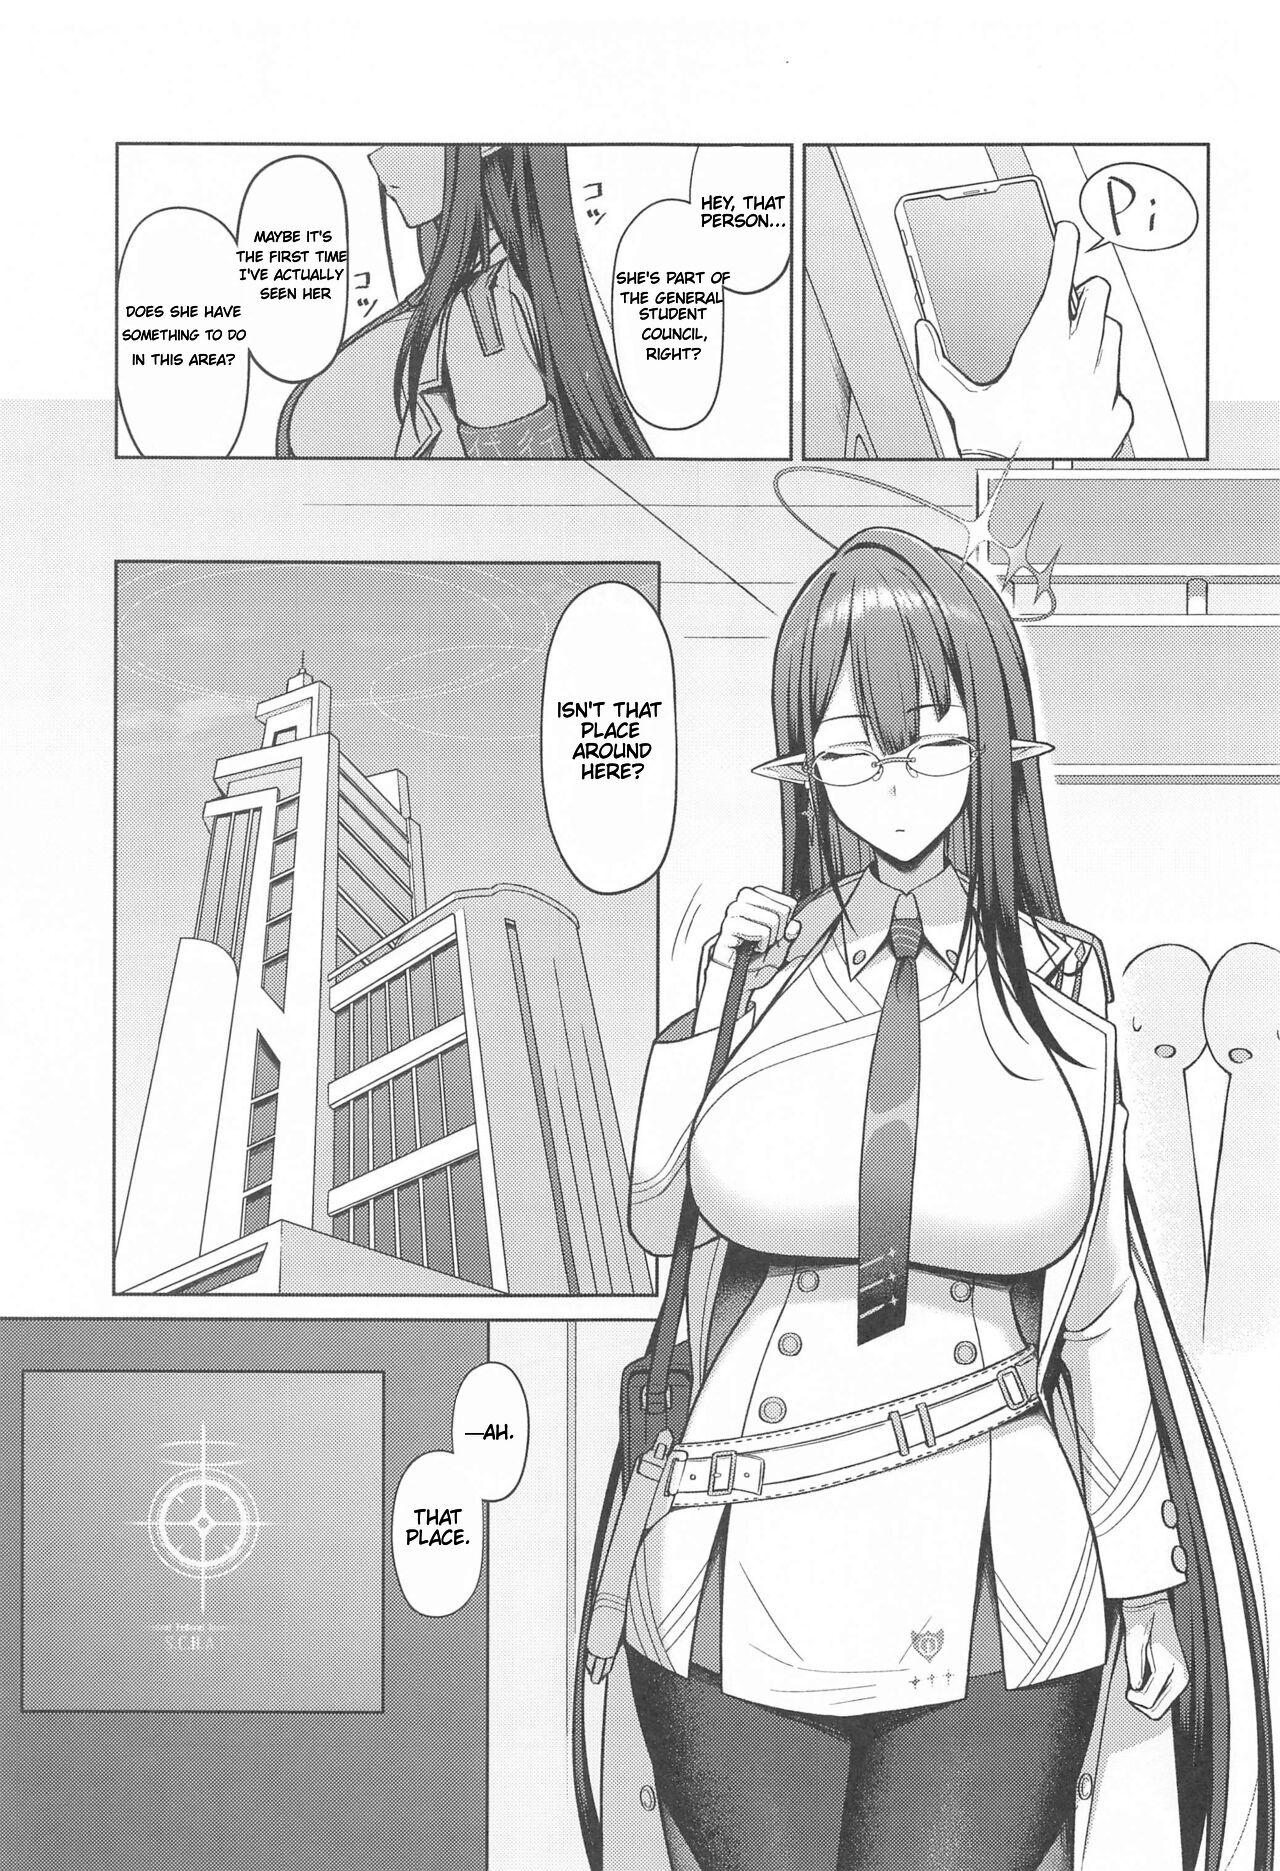 Butt Fuck Shuseki Gyouseikan no Kojin Gyoumu 2 | Personal Services of the Chief Administrative Officer 2 - Blue archive Web - Page 2